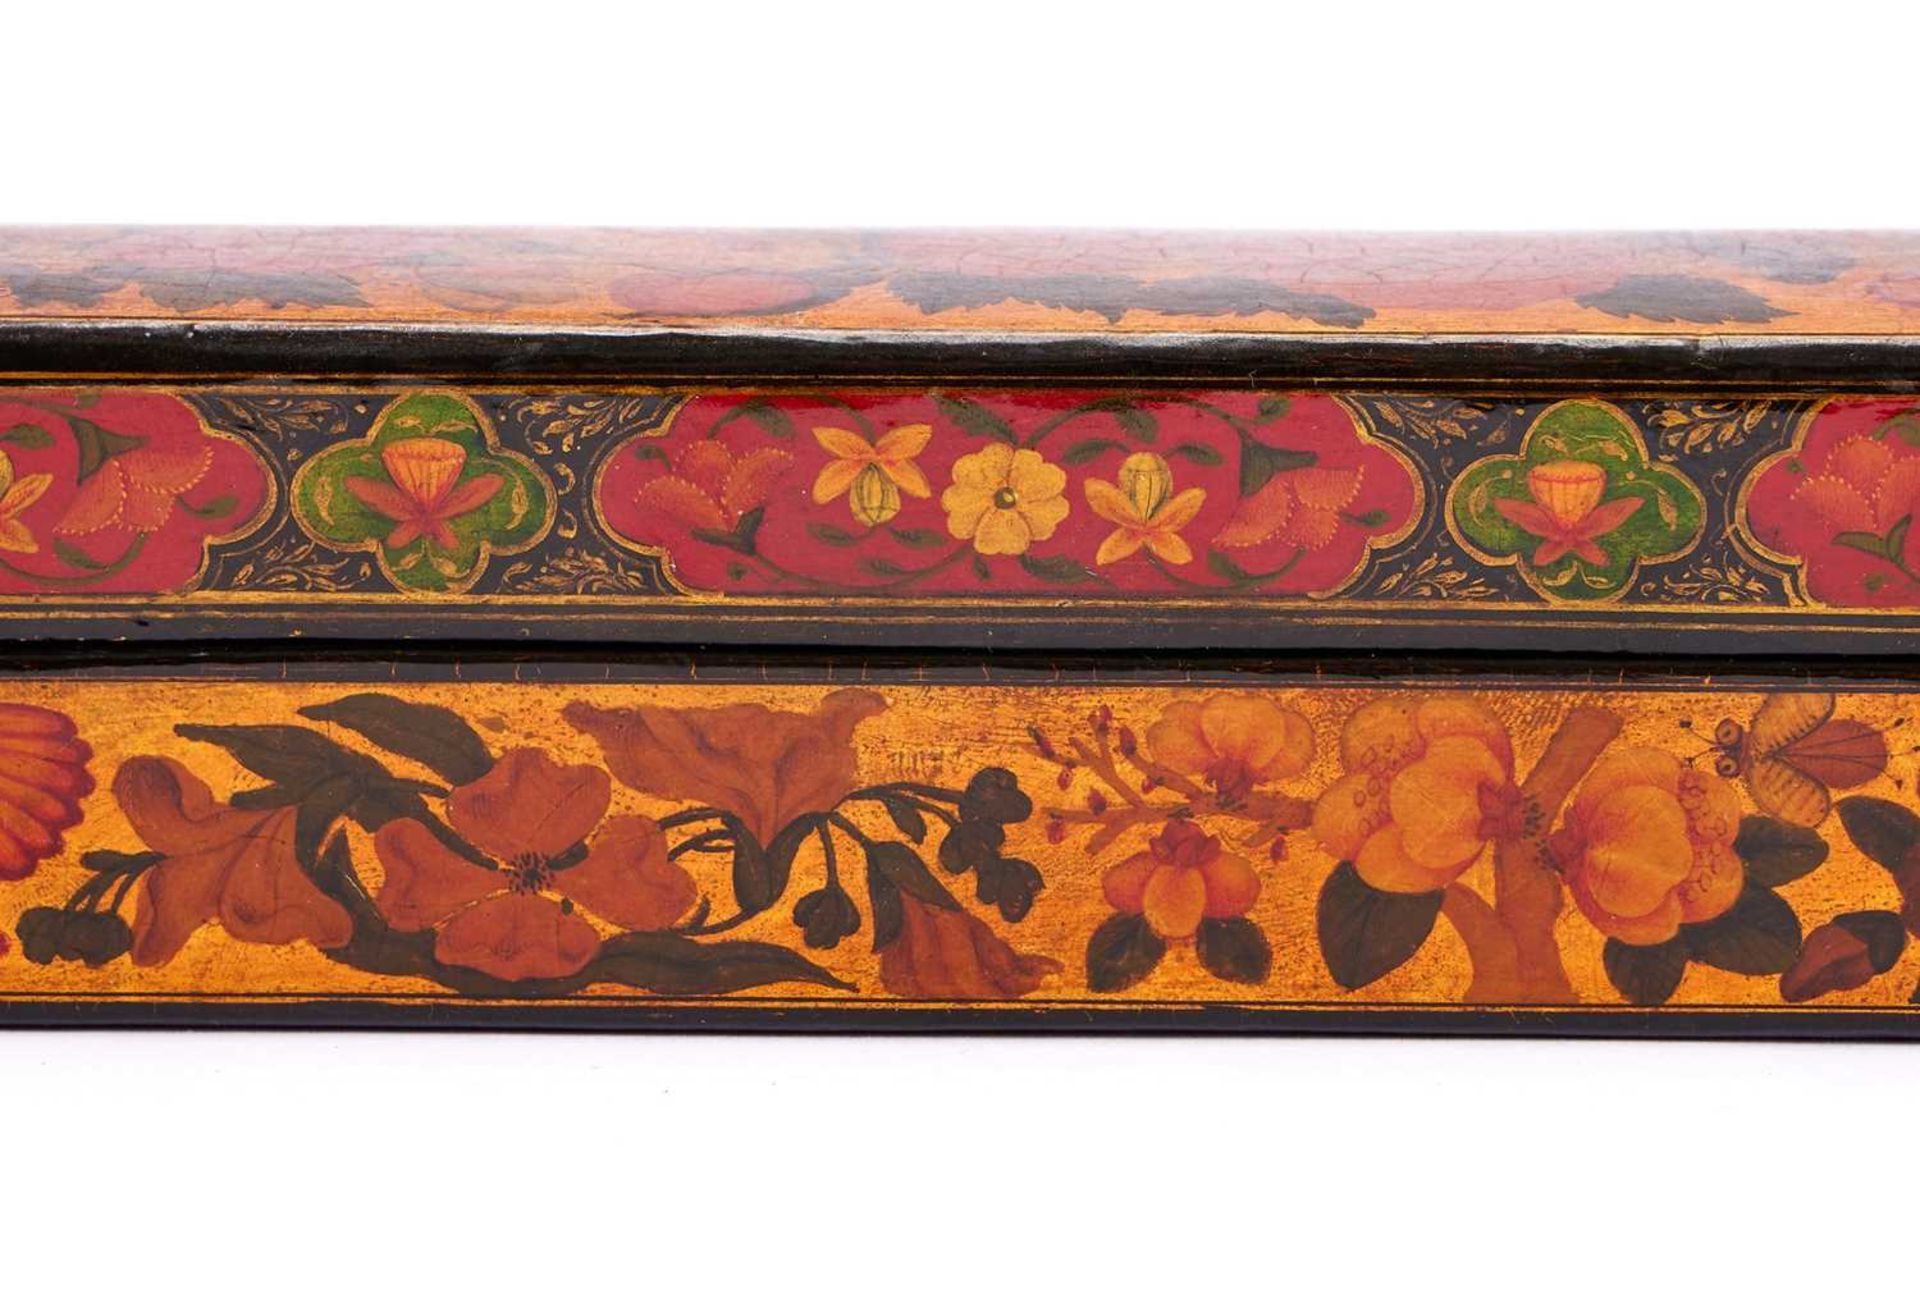 A LARGE 19TH CENTURY OR EARLIER PERSIAN LACQUERED SCHOLAR'S PEN BOX - Image 2 of 2